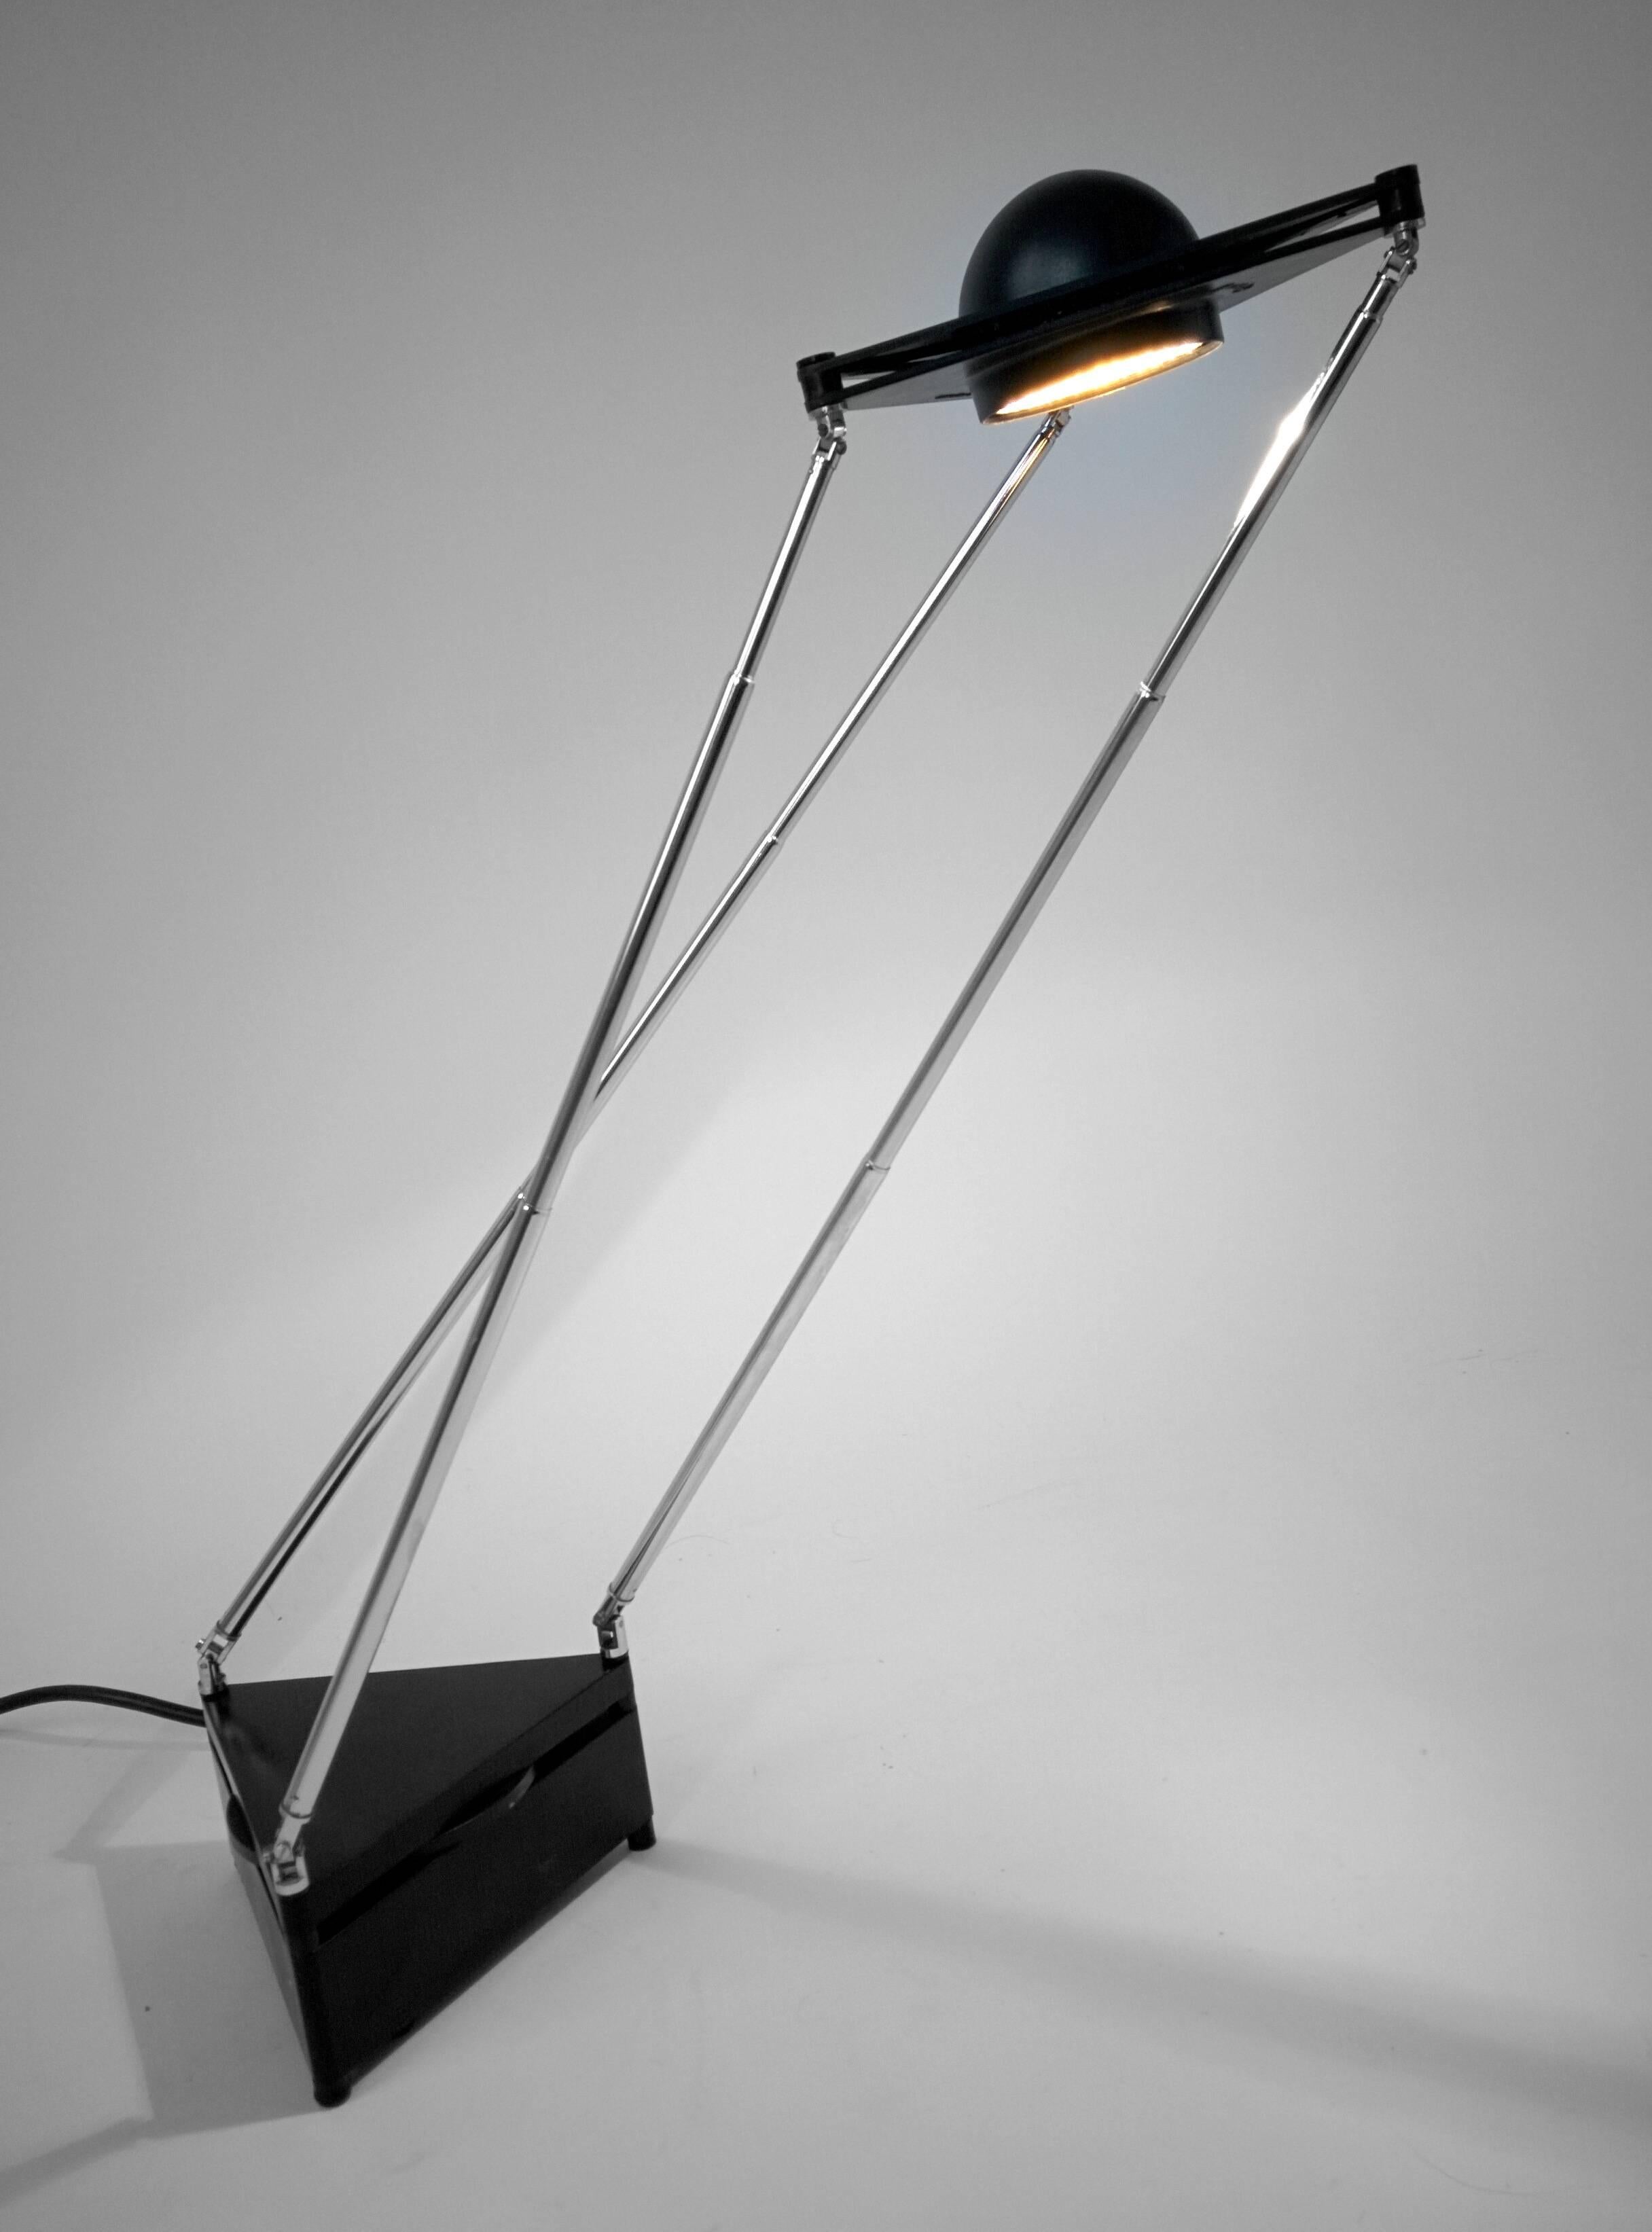 Early  edition .

Agile ,  modern , eclectic table lamp designed with car antenna  stem with chromed solid brass articulated joint on base and  head that permit to sculpt different aesthetical composition while lighting any given surface or